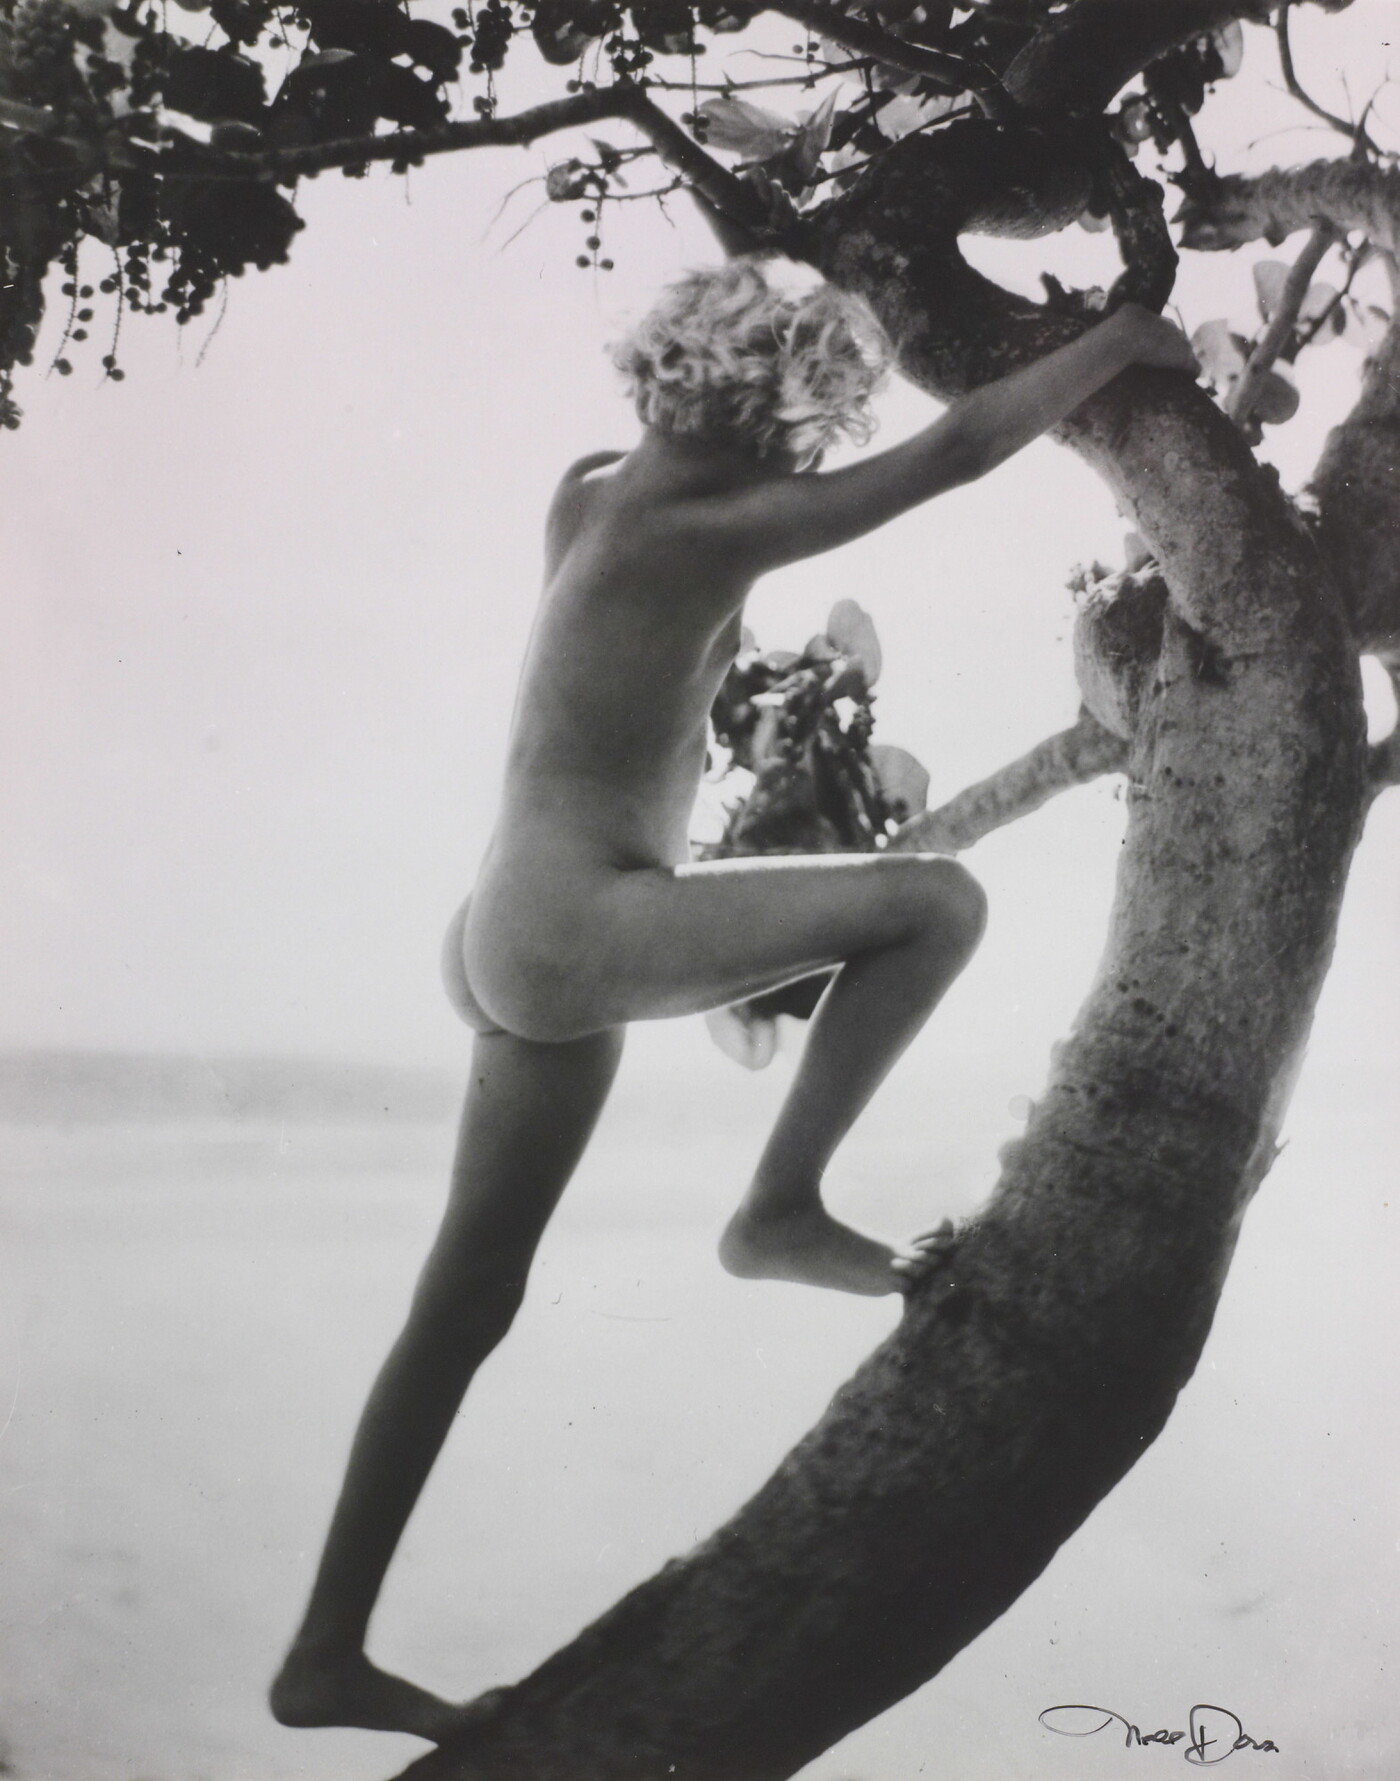 Nell Dorr :: The Sea Grape Tree, 1927-29. # 36 From In a Blue Moon, published 1939. Amon Carter Museum